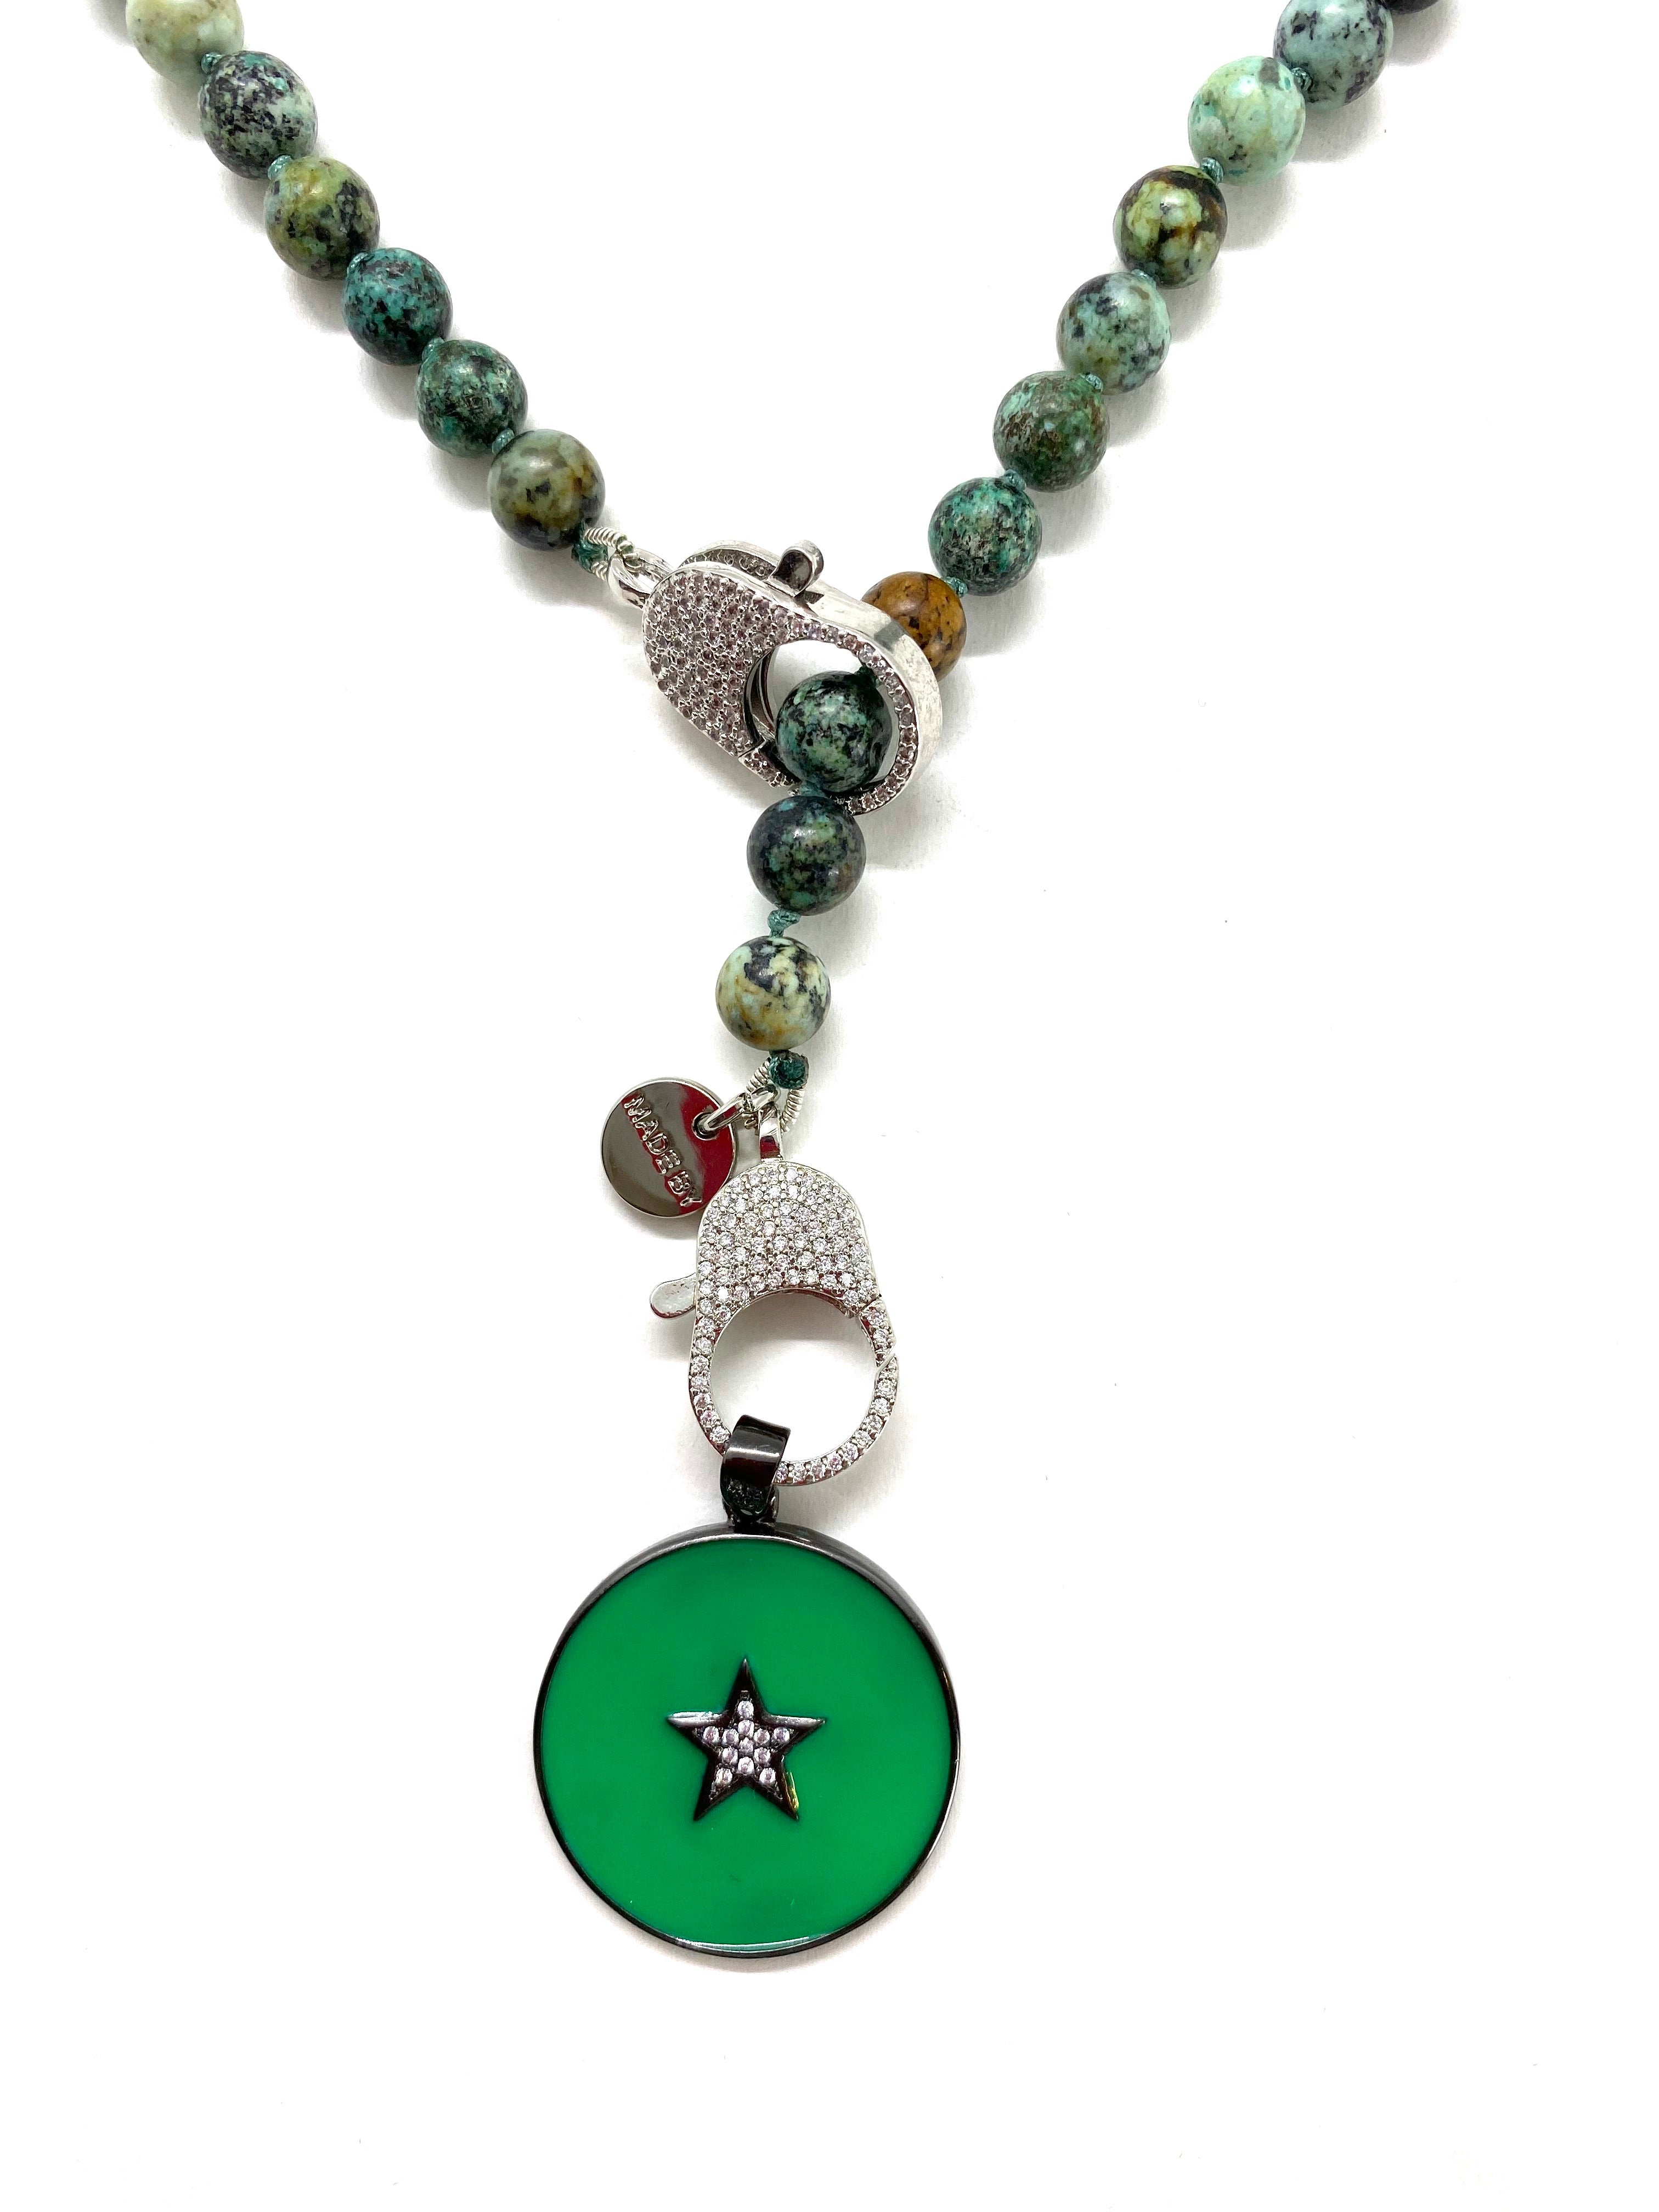 African green turquoise, silver clasp